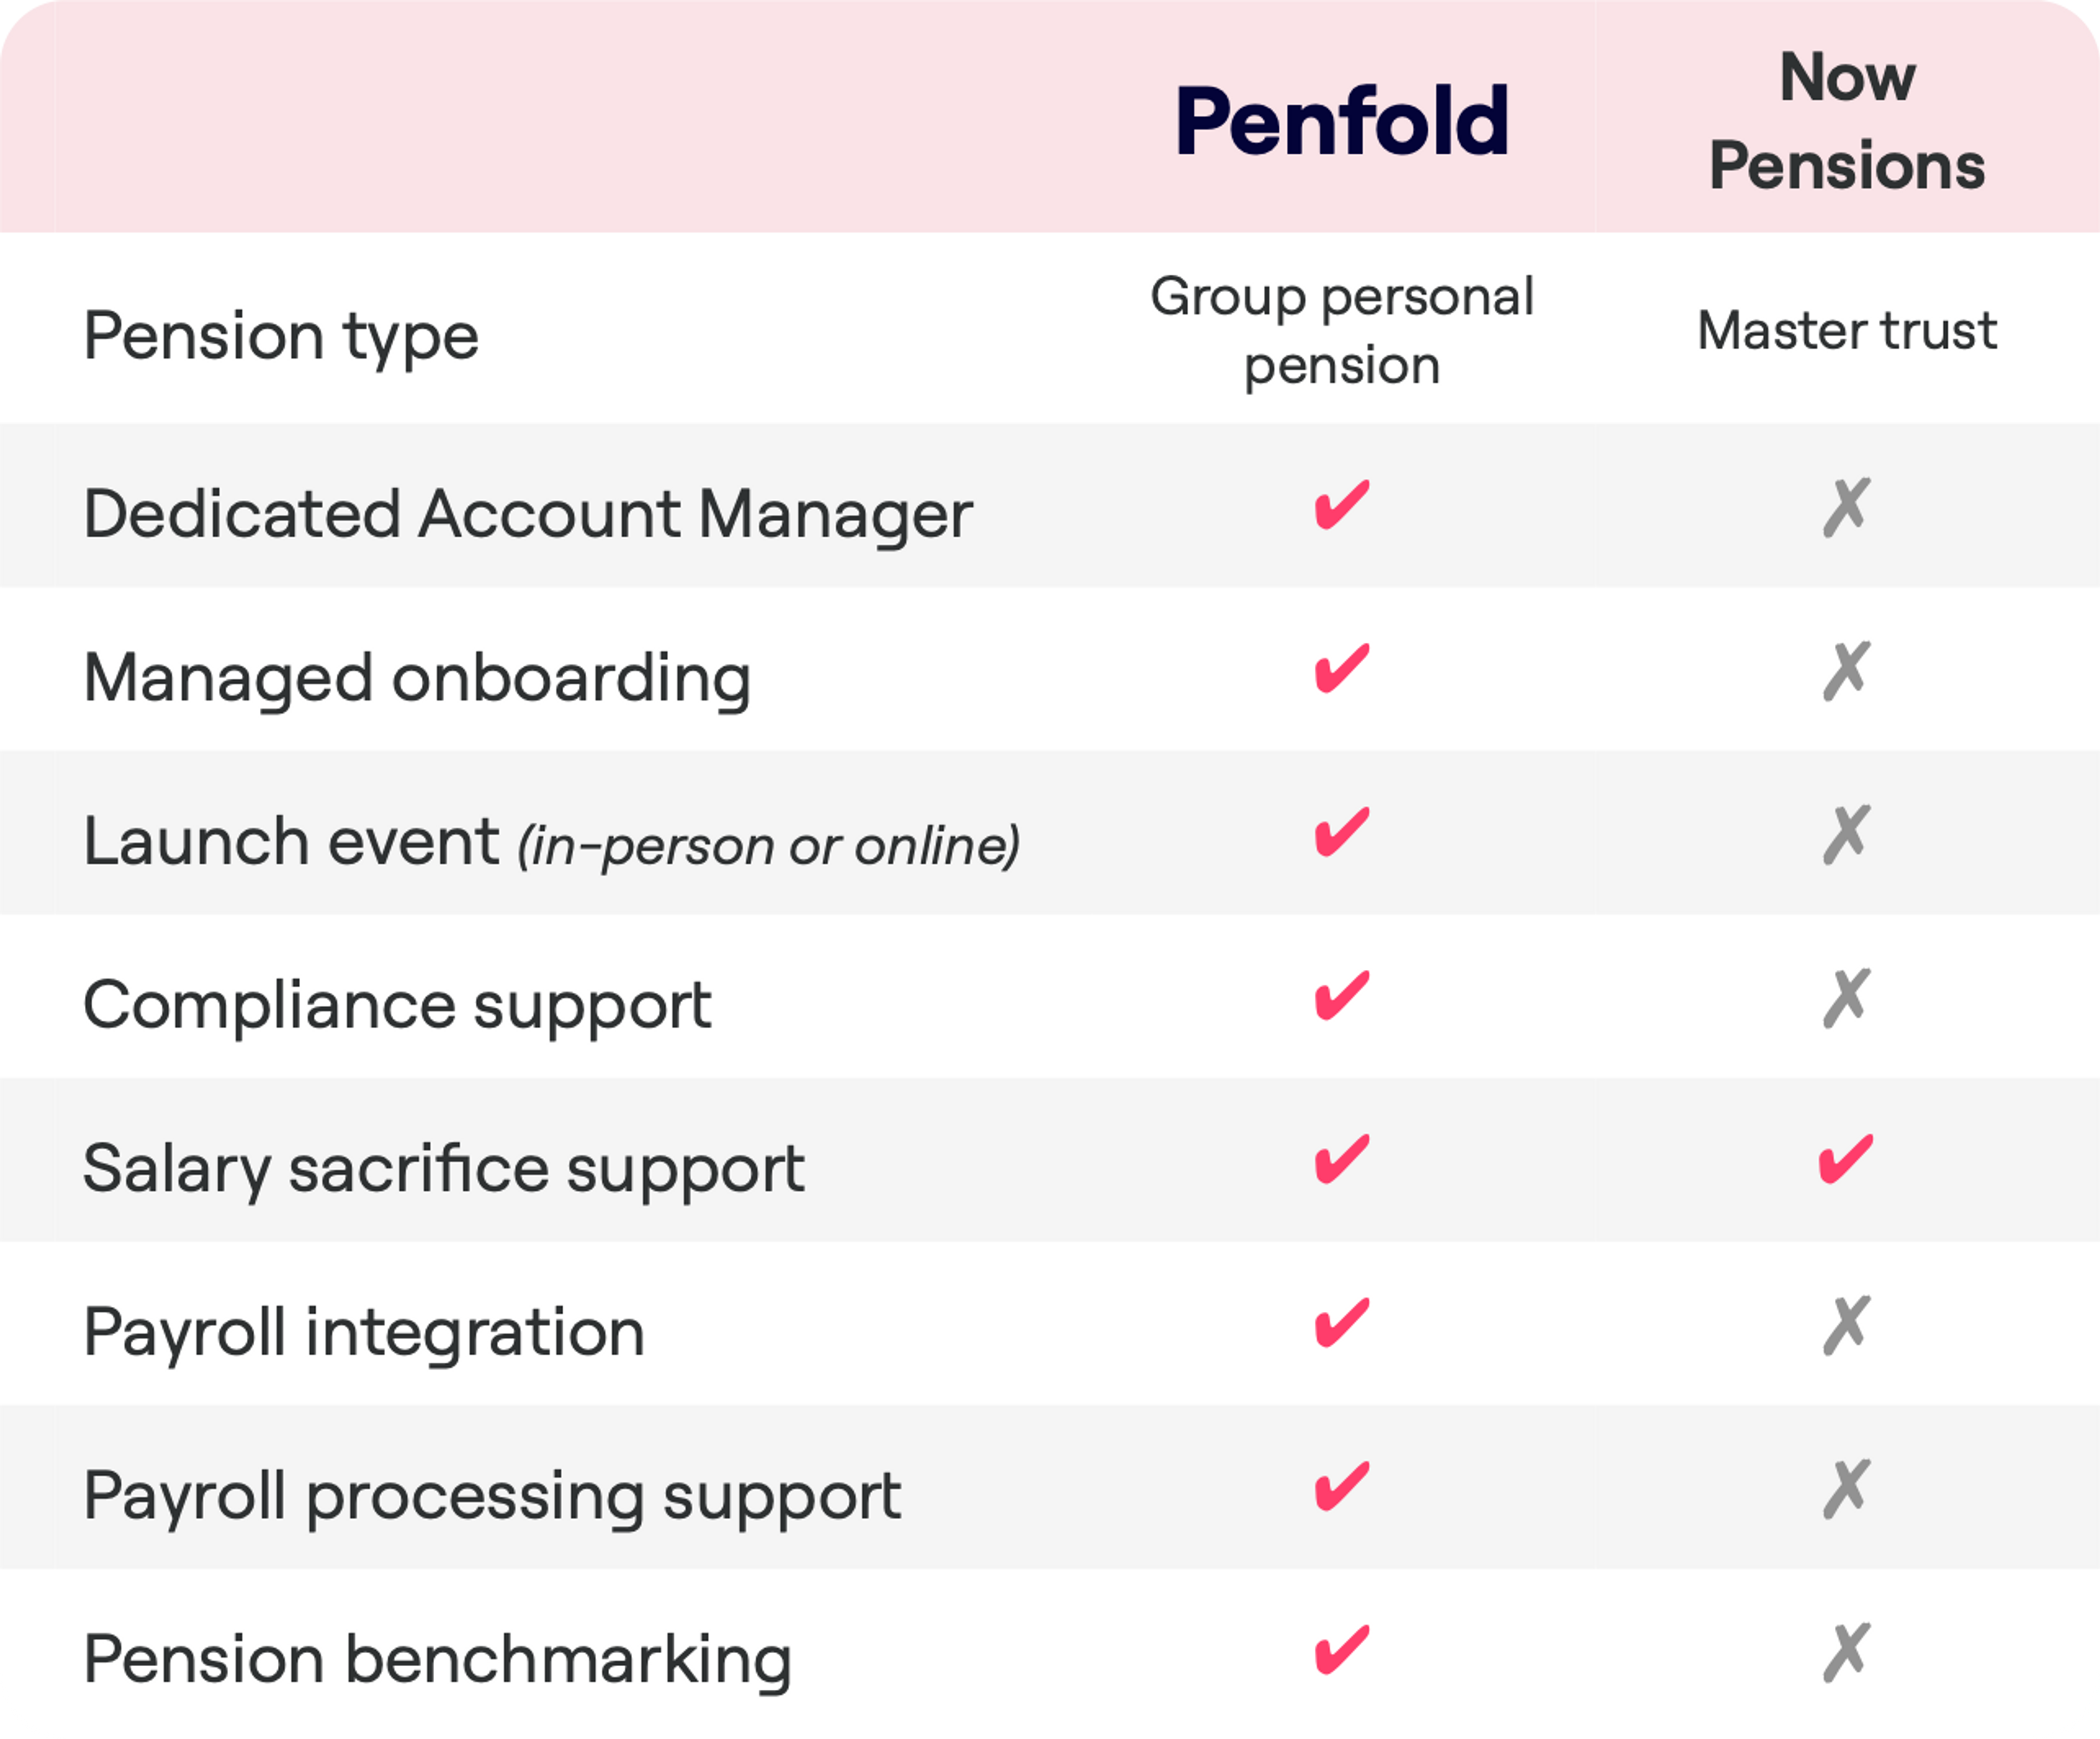 A comparison table listing the features offered by Penfold, a Group personal pension, versus Now Pensions, a Master trust. Features include Dedicated Account Manager, Managed onboarding, Launch event, Compliance support, Salary sacrifice support, Payroll integration, Payroll processing support, and Pension benchmarking. Penfold offers all eight listed features. Now Pensions offers only Salary sacrifice support and lacks the other services.